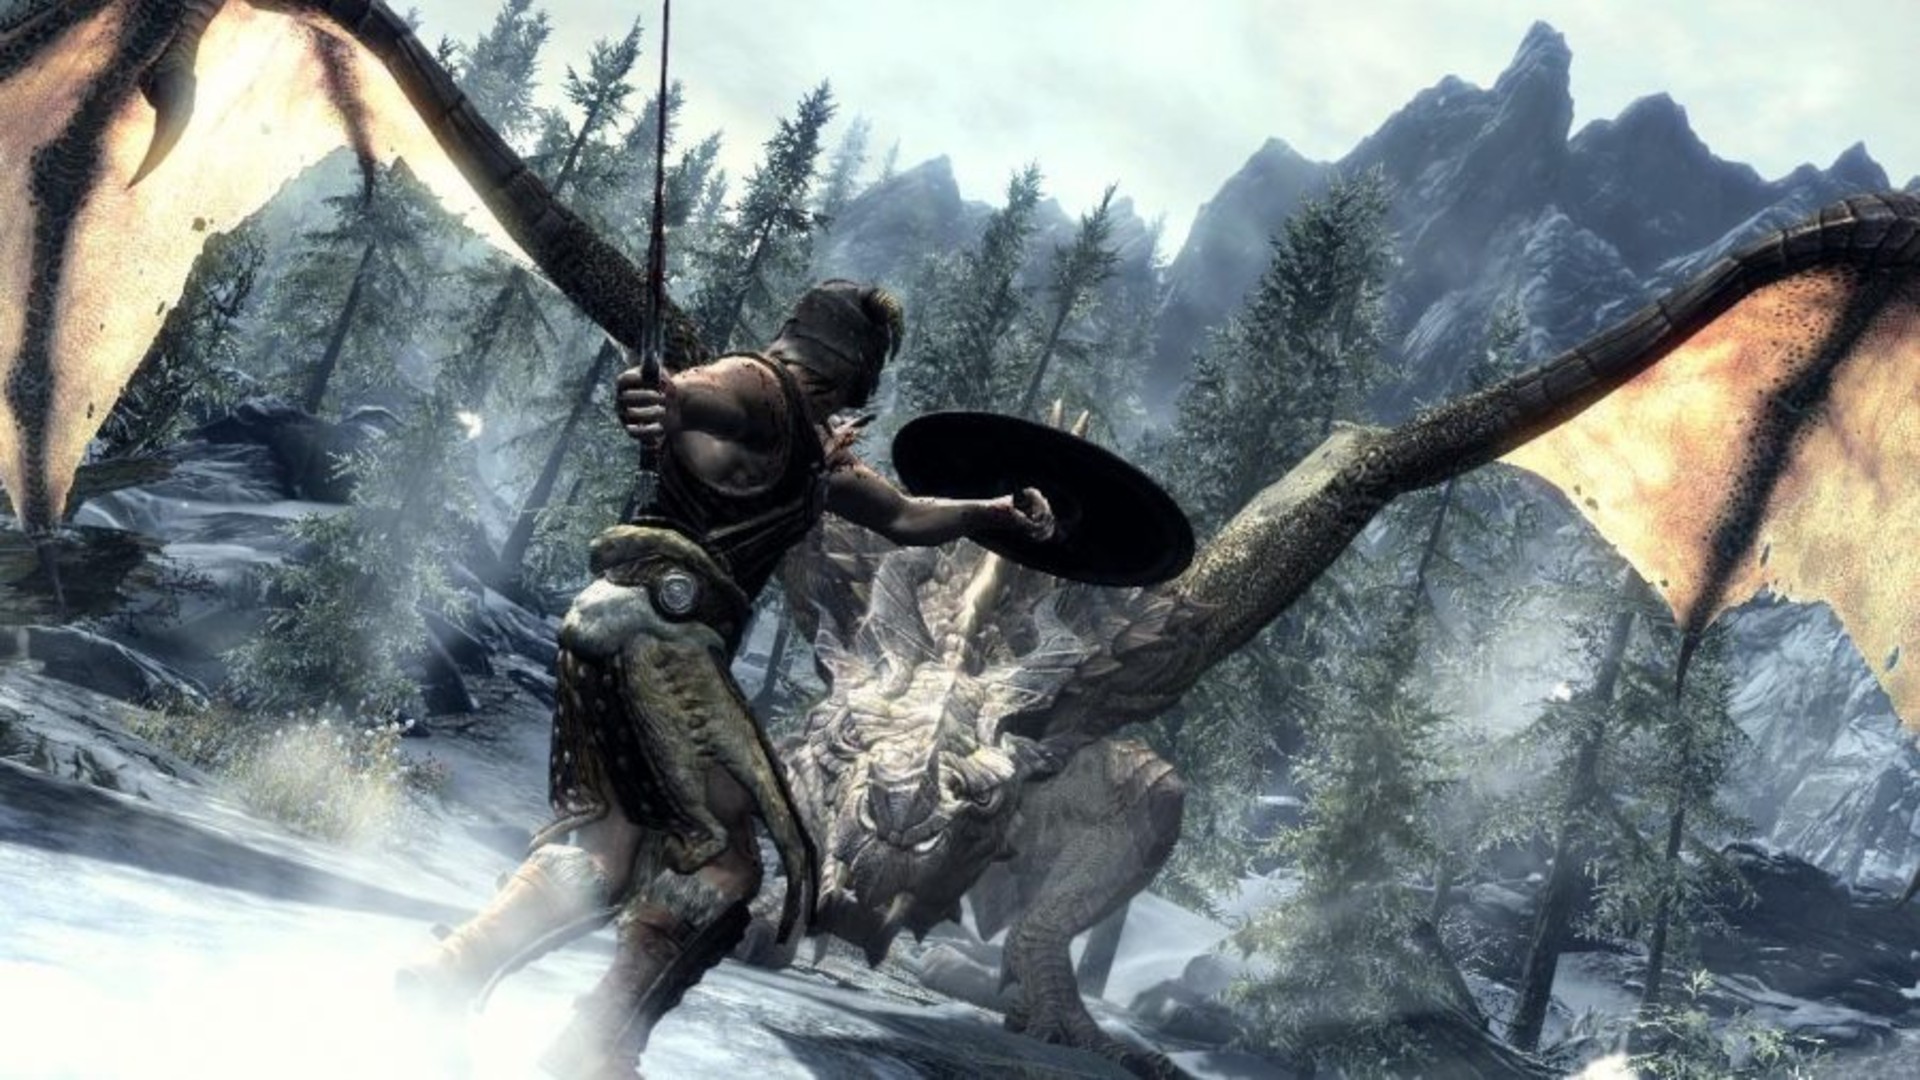 This Skyrim mod is a fully voiced, expanded overhaul of the famous Paarthurnax quest